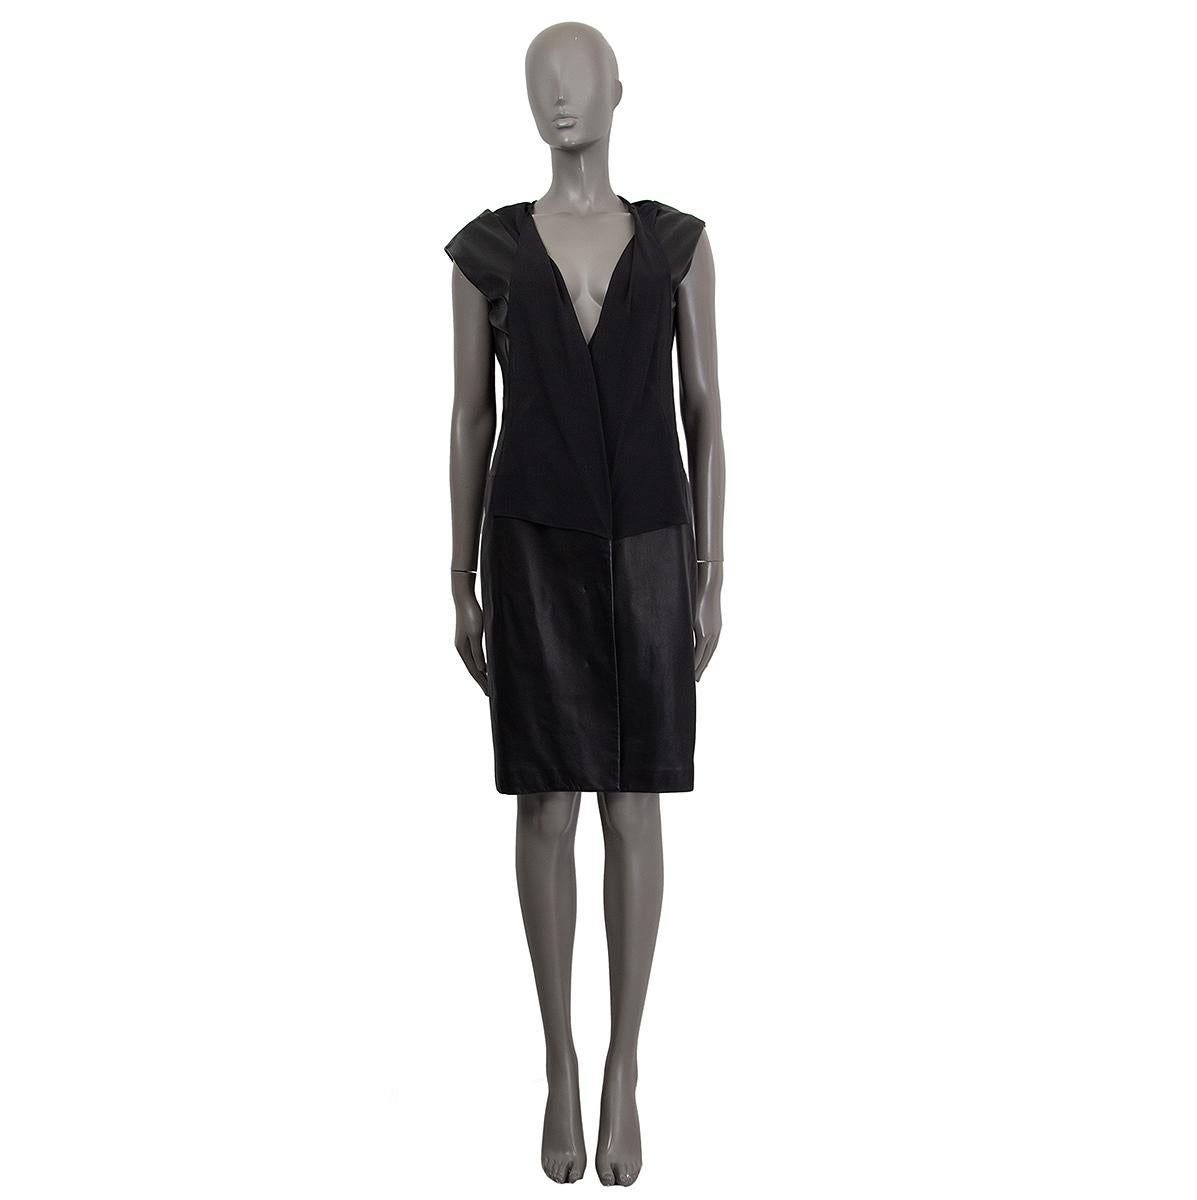 100% authentic Jil Sander sleeveless sheathe leather dress in black missing tag 100% (leather) silk (100%) with a front silk-shawl to tie in the back,V-Neckline and back. Lined in black fabric missing tag (probably viscose blend). Closes with